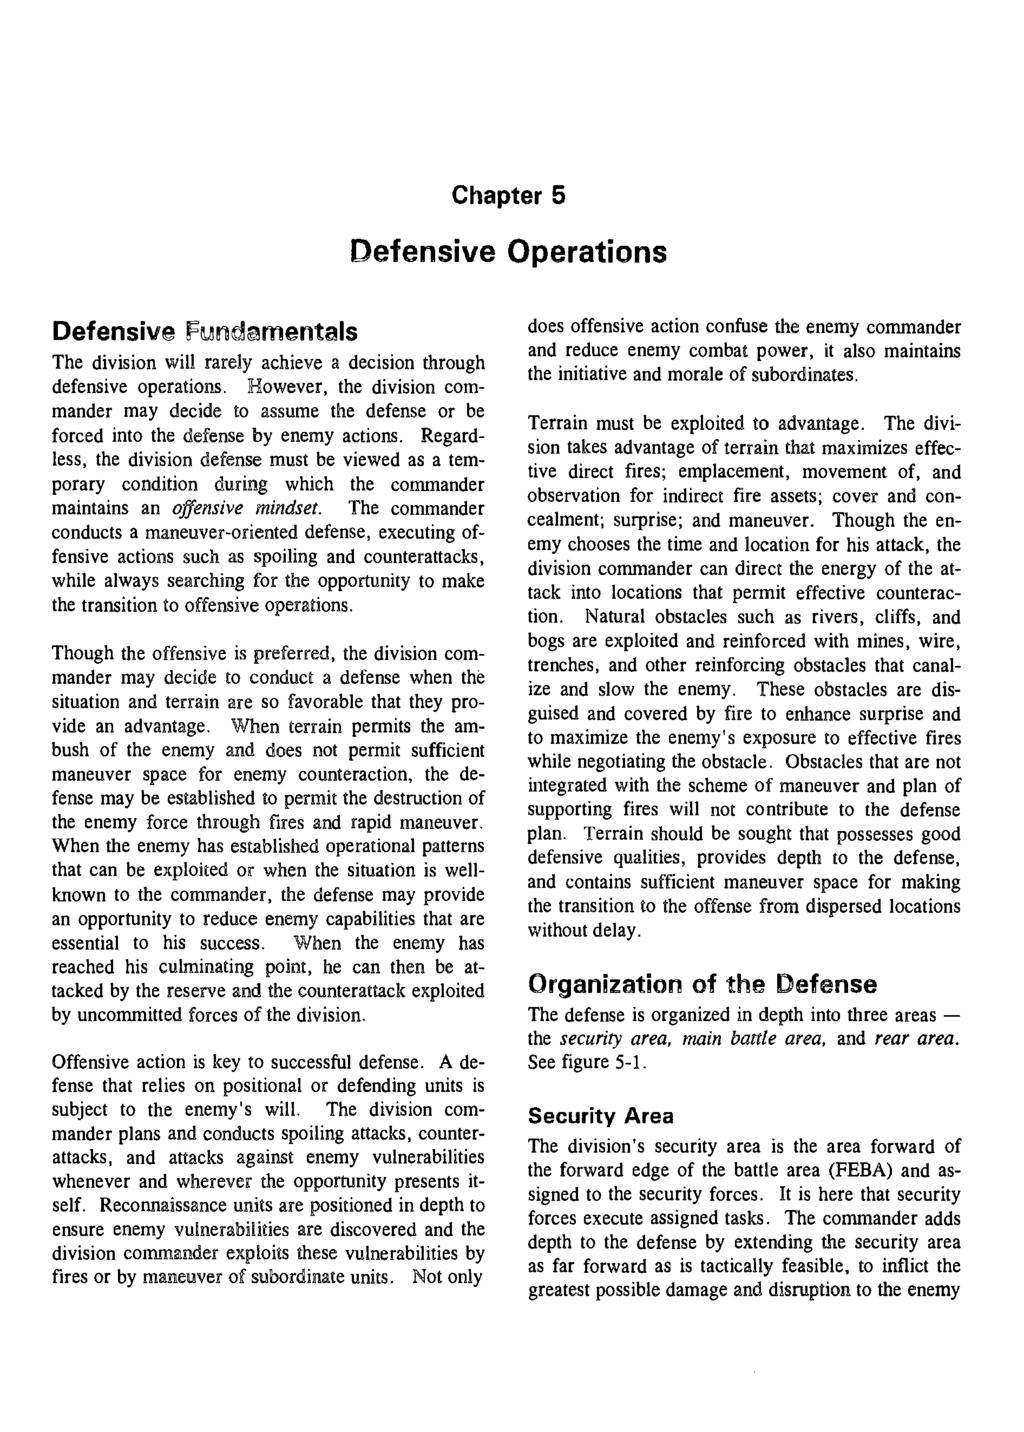 Chapter 5 Defensive Operations Defensive FLrnmentaIs The division will rarely achieve a decision through defensive operations.